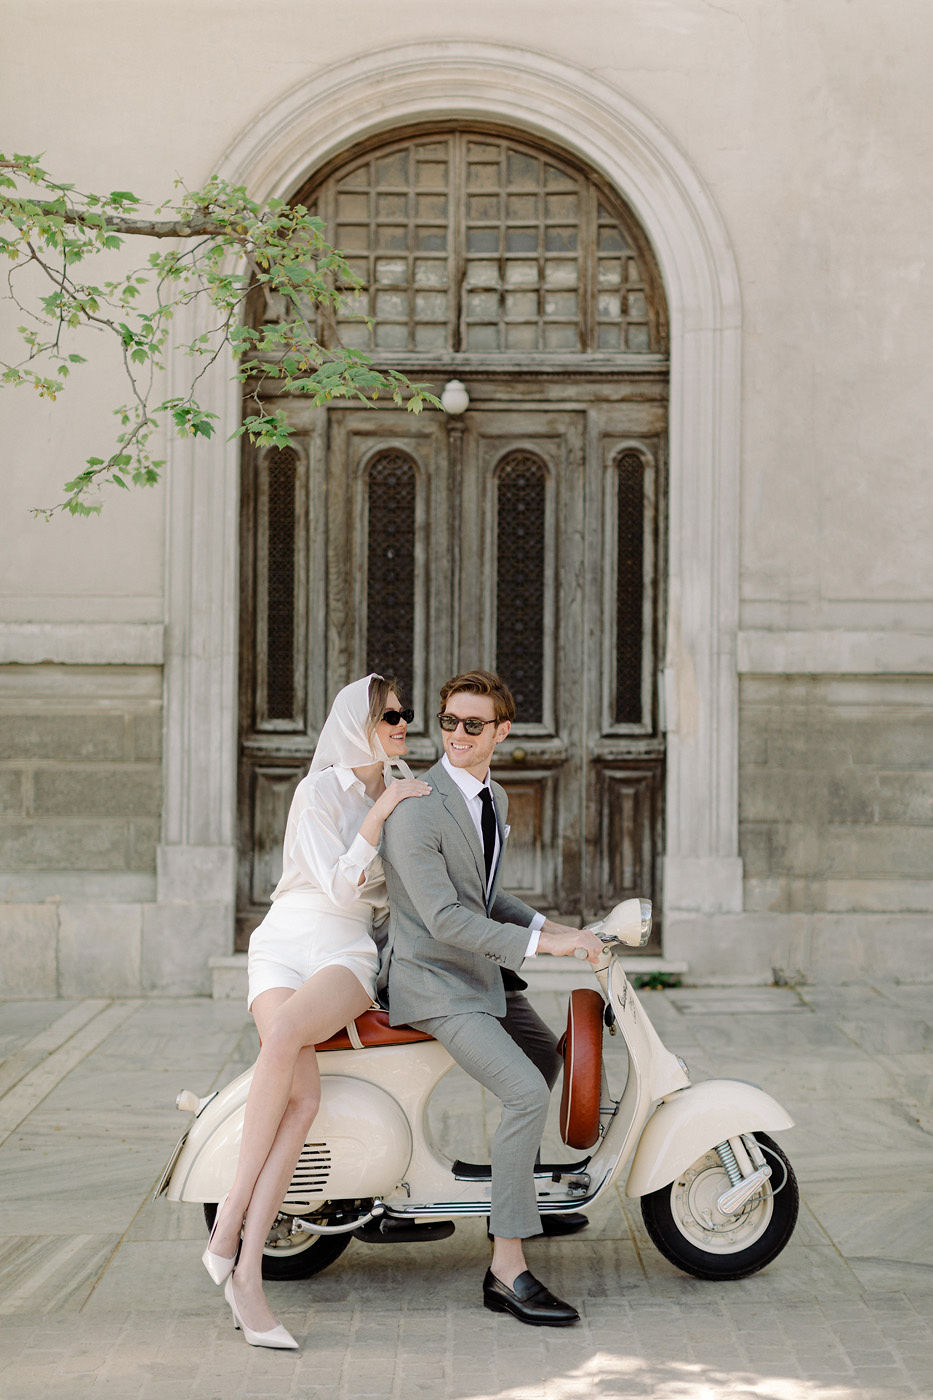 A stylish proposal + engagement shoot in Greece